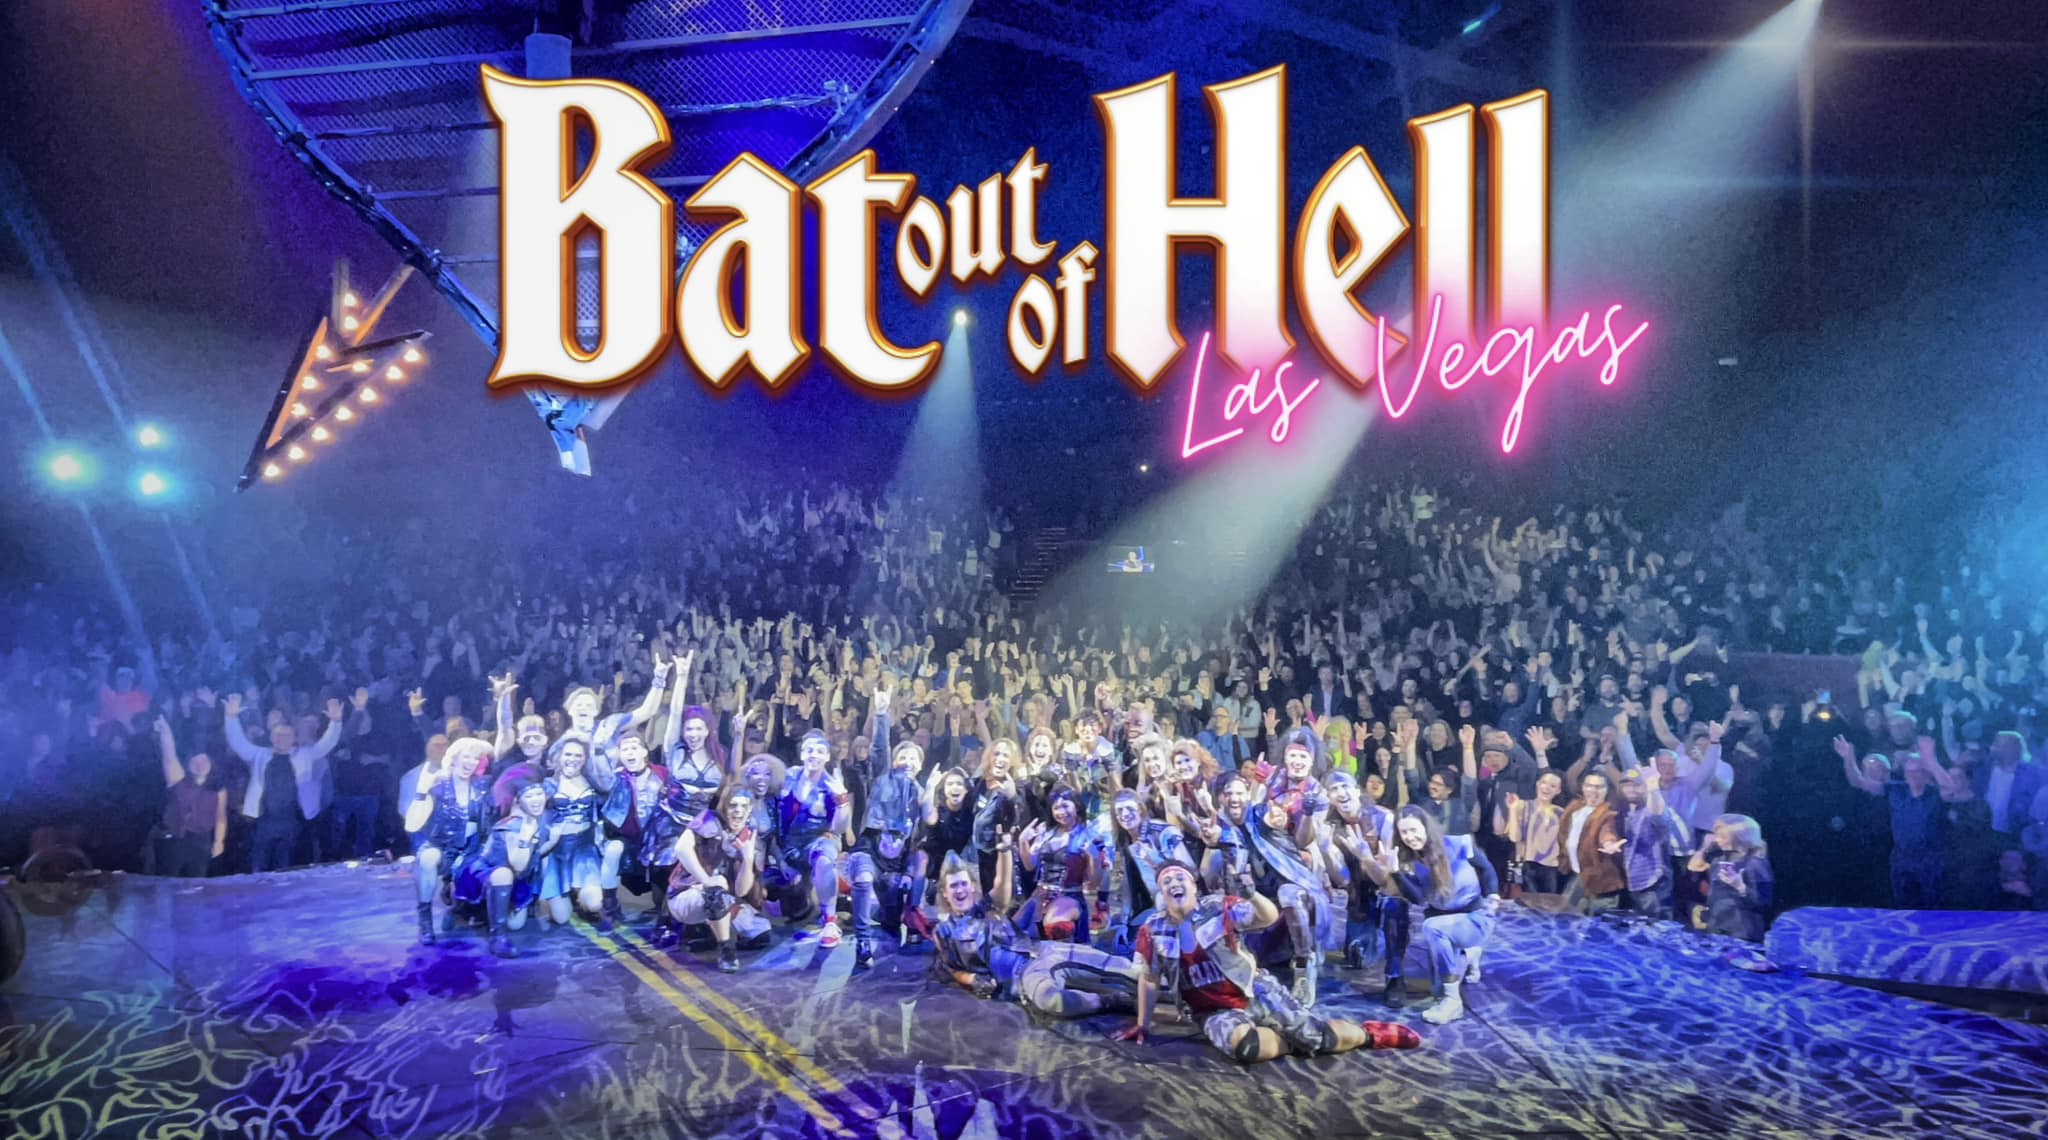 Final Curtain call - Bat Out Of Hell Las Vegas